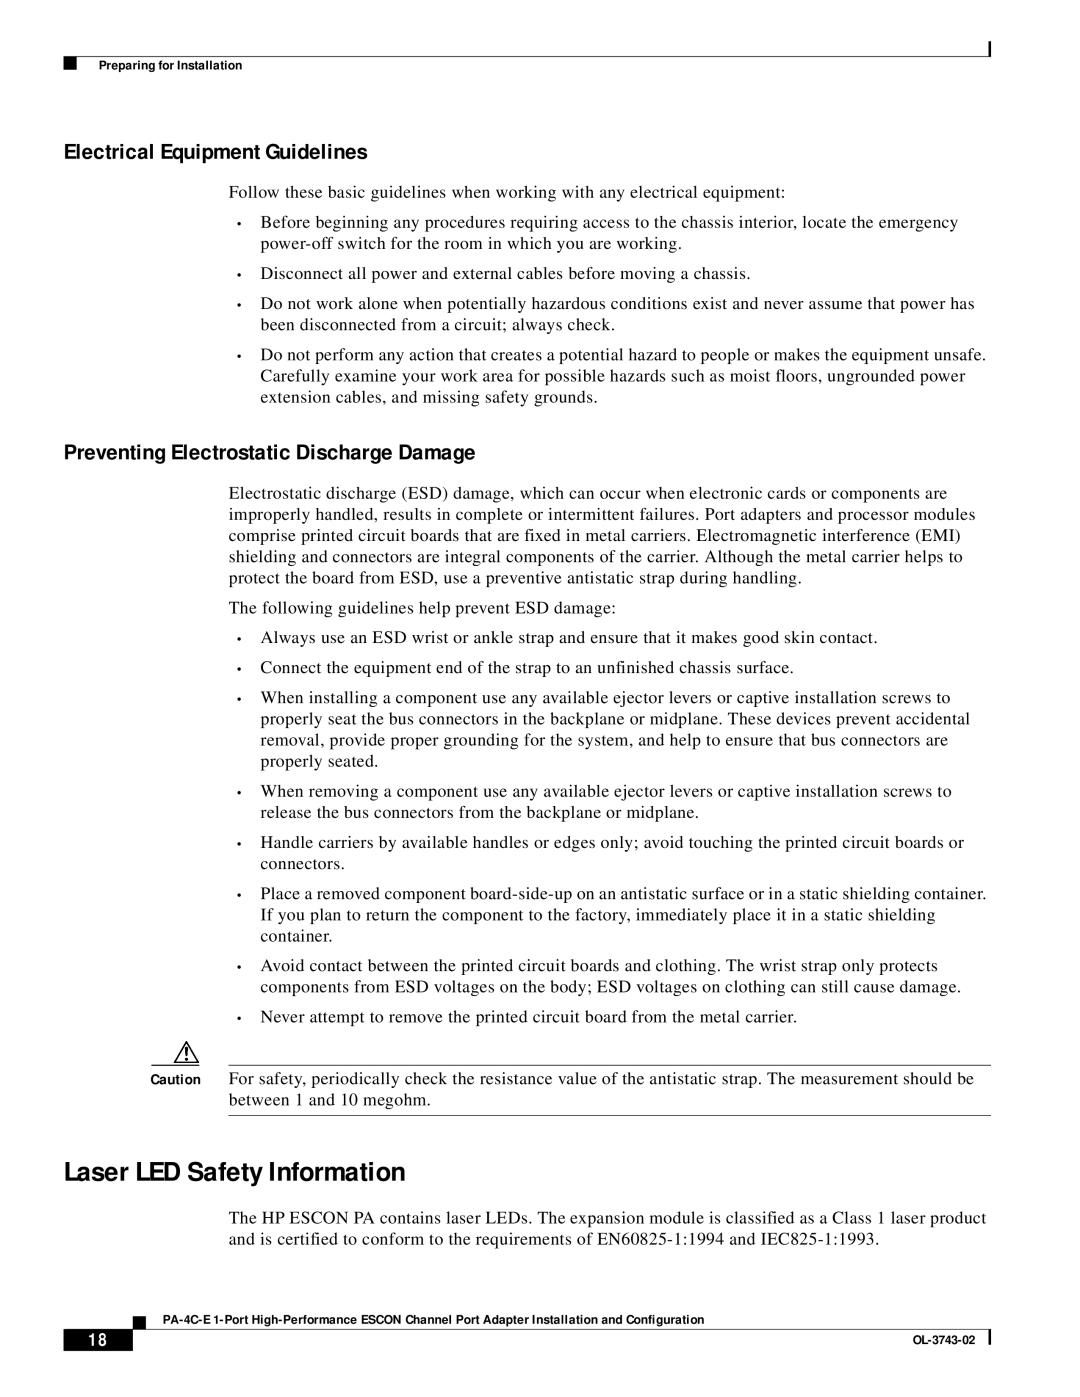 Cisco Systems PA-4C-E 1 manual Laser LED Safety Information, Electrical Equipment Guidelines 